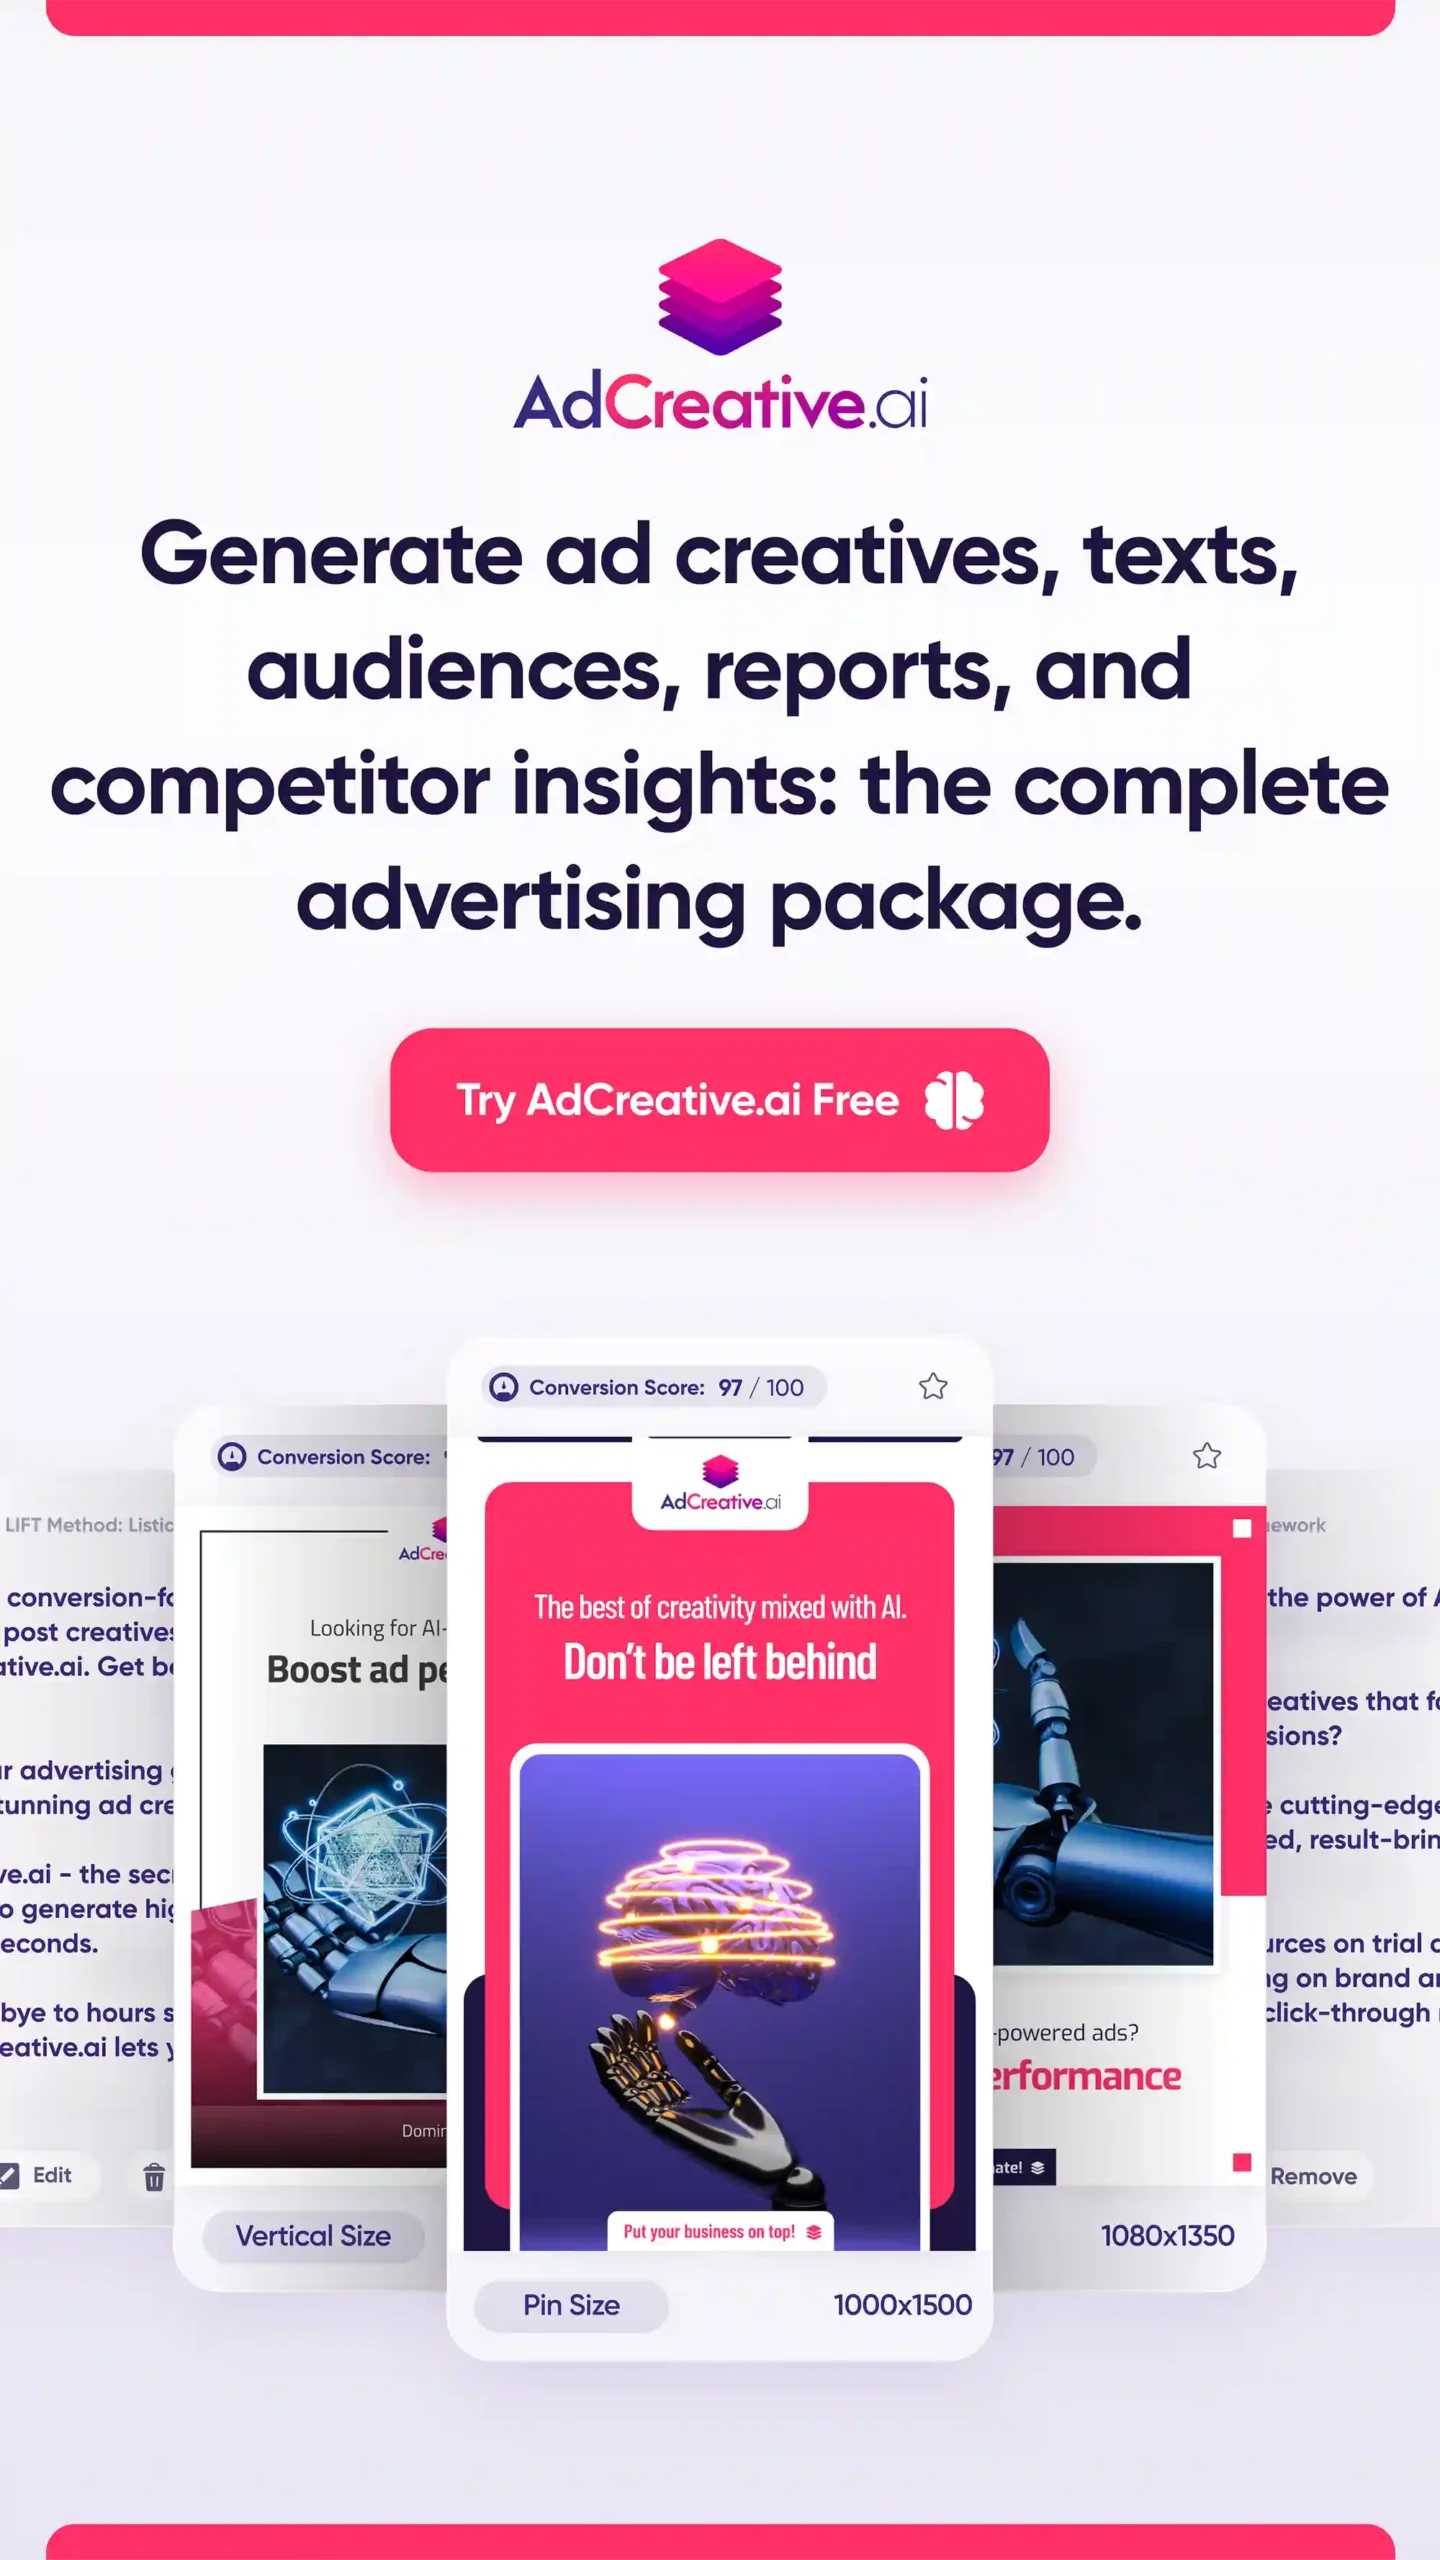 See the Ad Creative AI Review in detail.